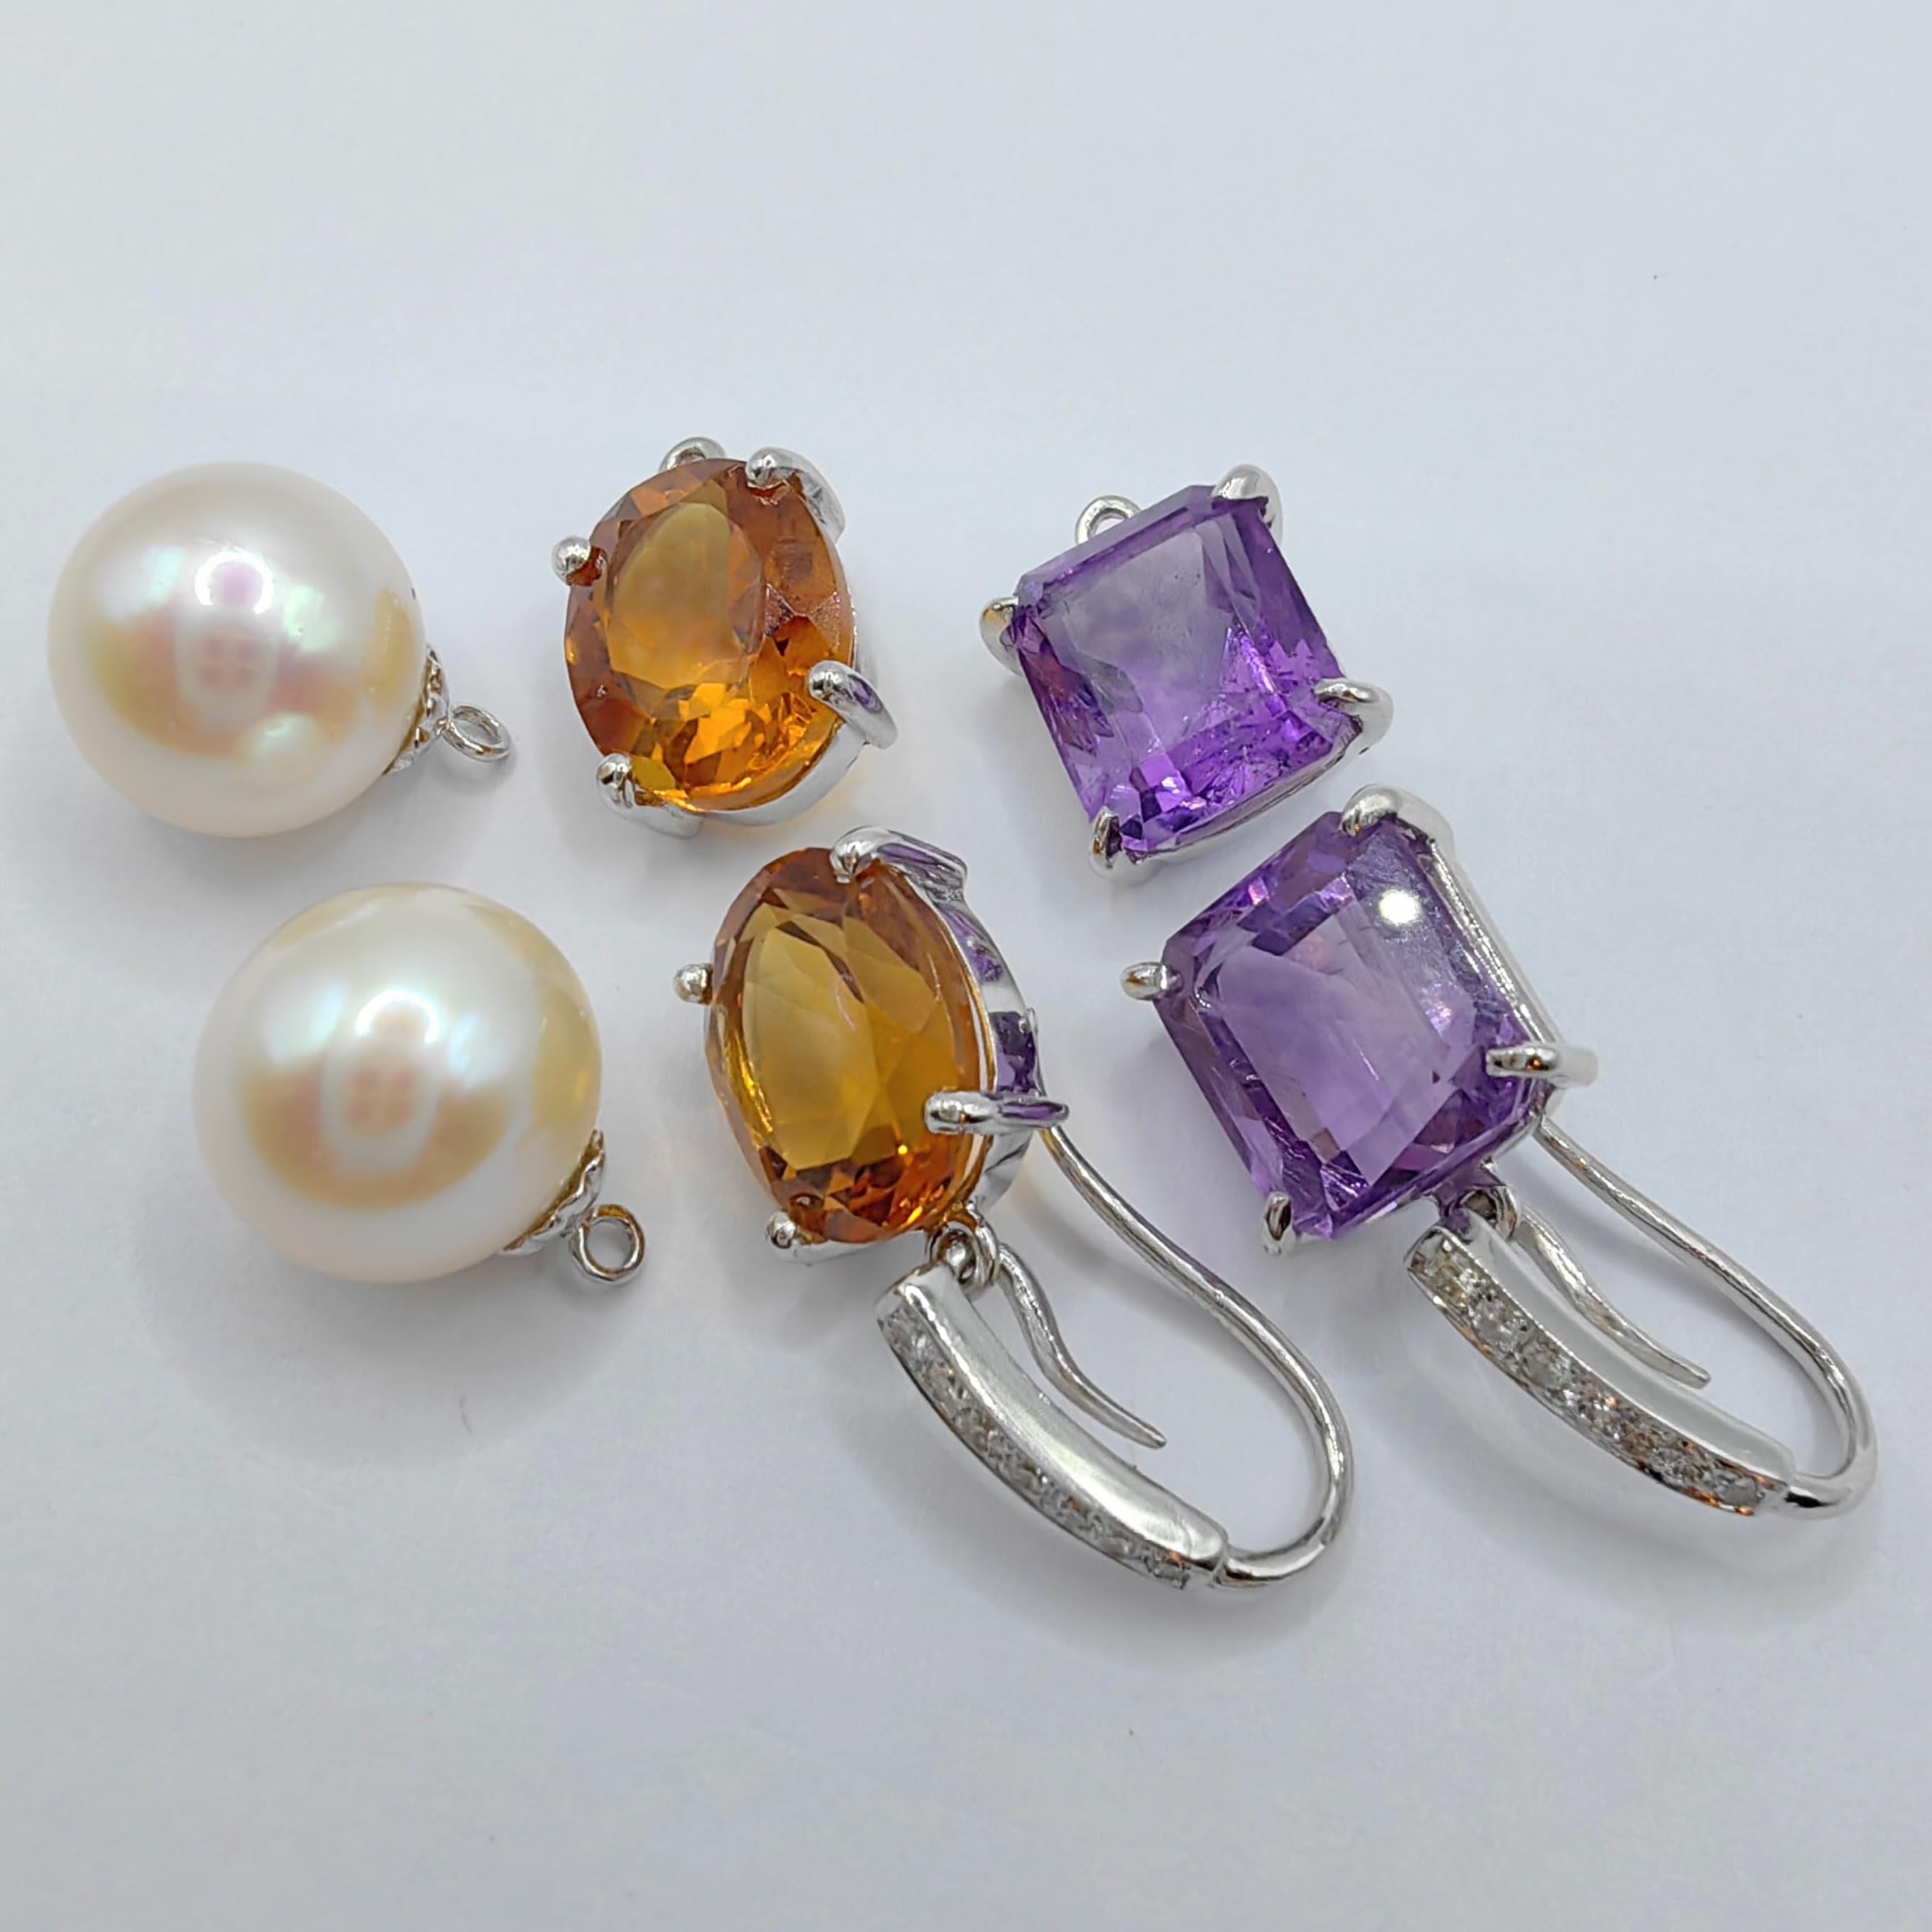 Introducing our exquisite 3-in-1 Amethyst/Citrine/Pearl Diamond 18K White Gold Drop Earrings Gift Set, a captivating collection that offers three distinct looks in one. This versatile set showcases the enchanting beauty of amethysts, citrines, and